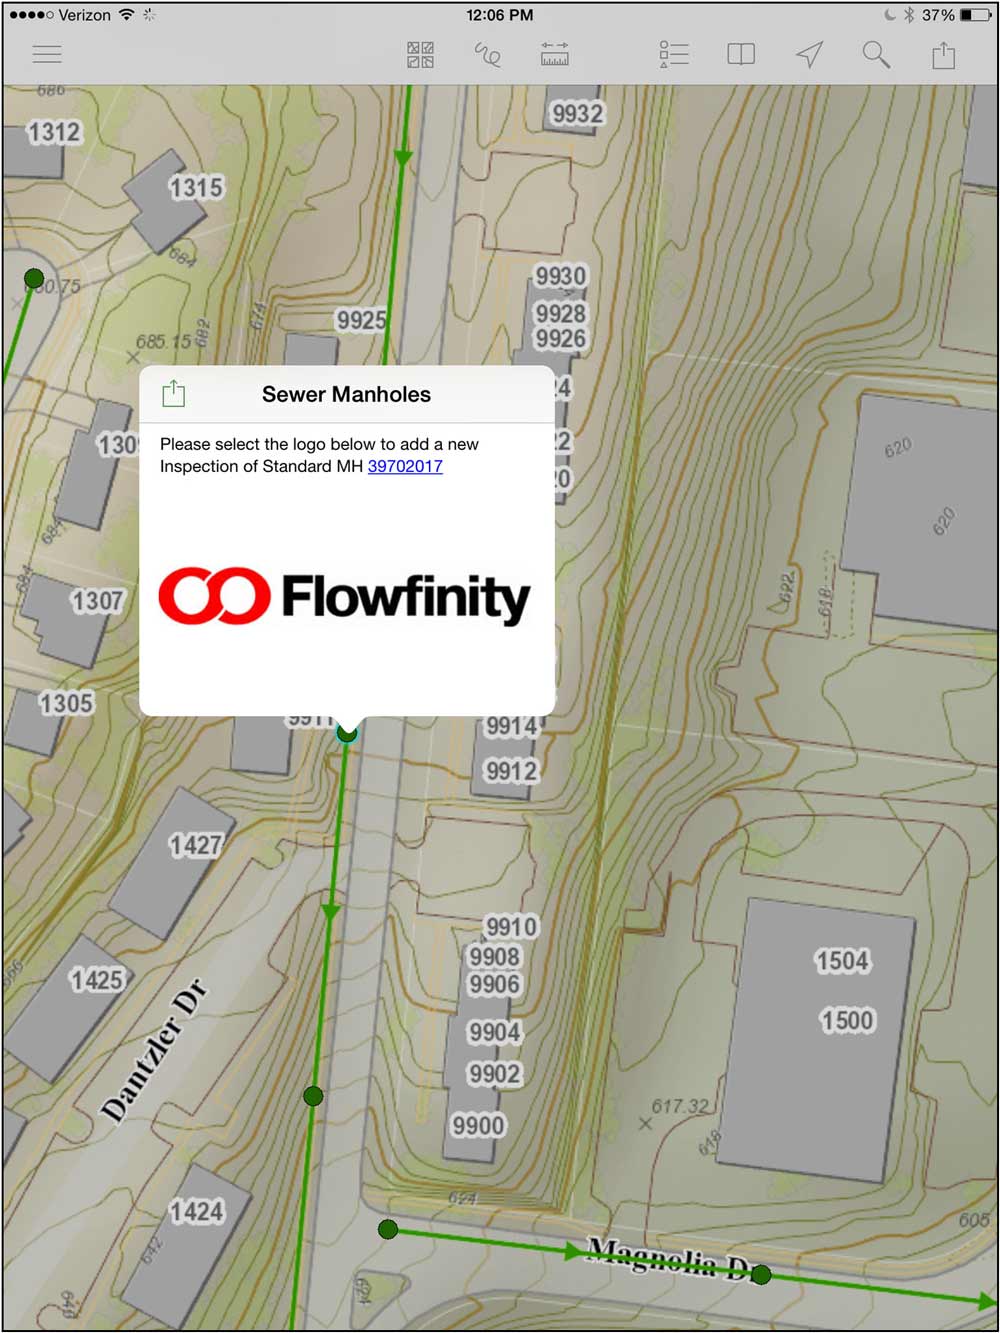 Flowfinity - Configuring ArcGIS Online Maps with Flowfinity apps